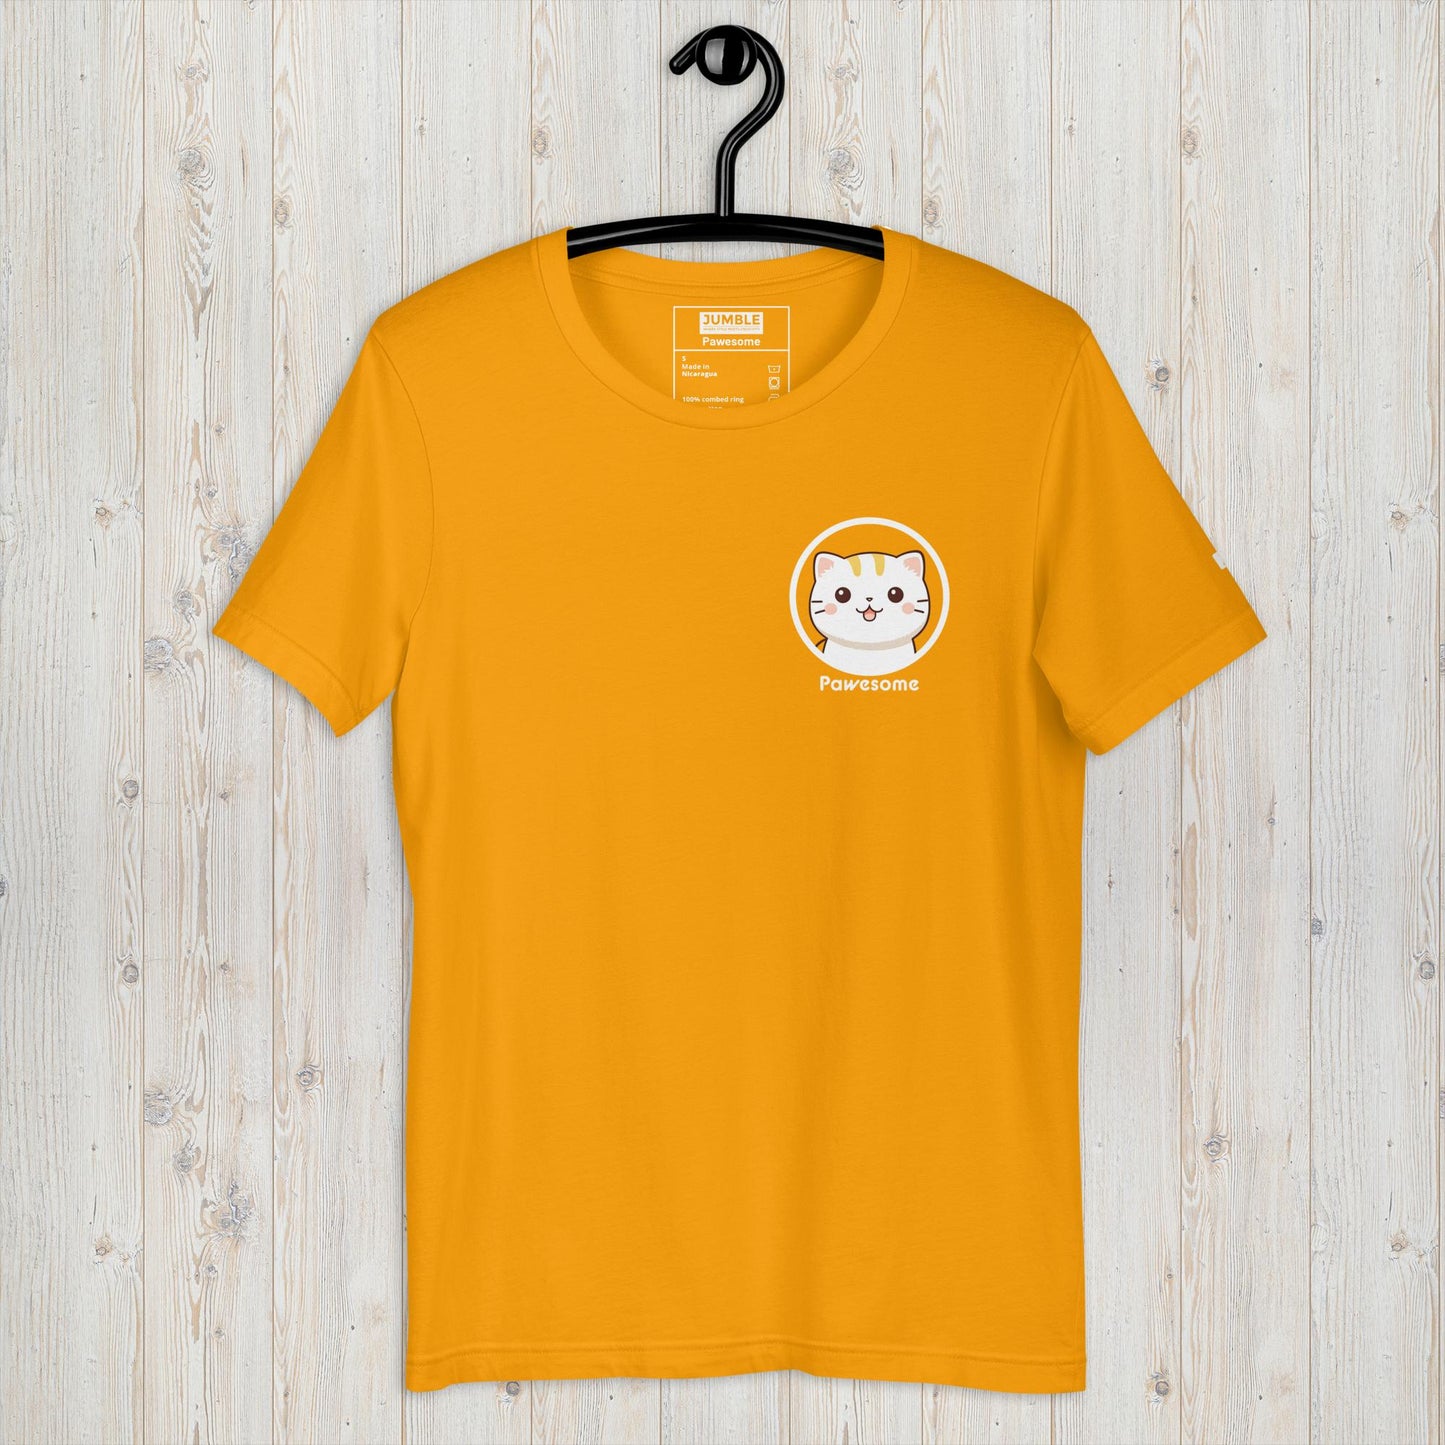 Pawesome Unisex t-shirt in gold on hanger